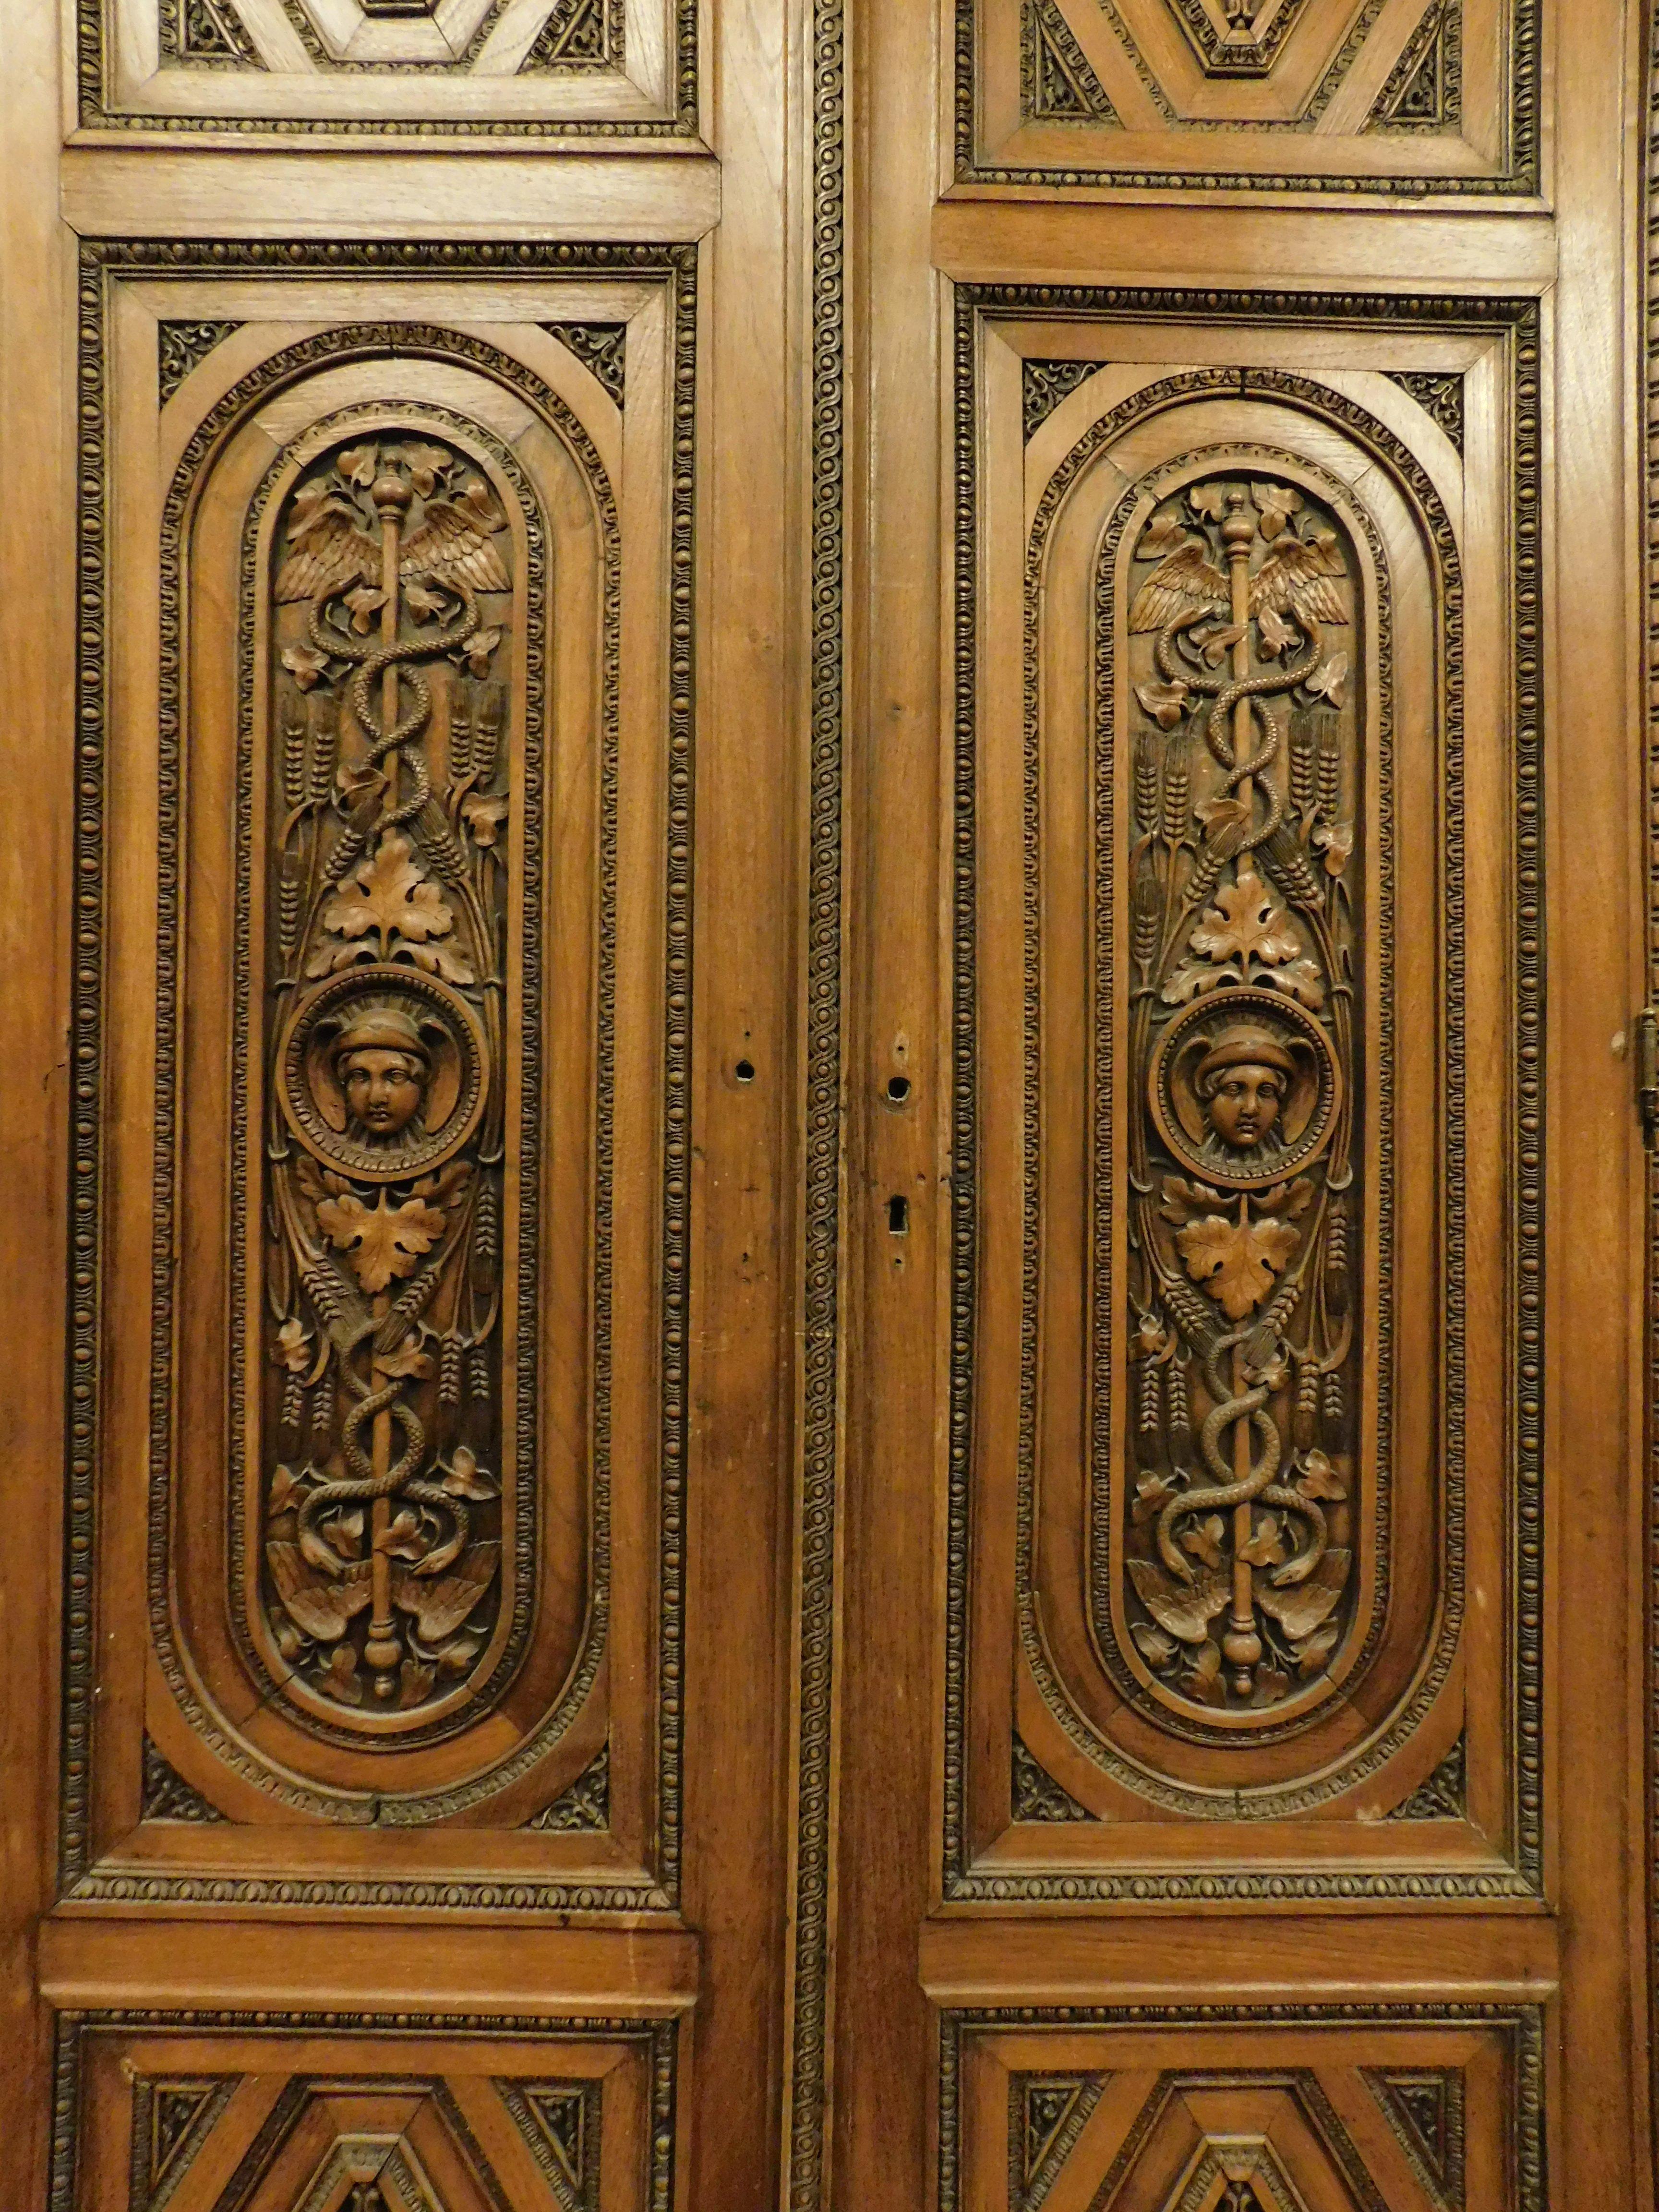 Hand-Carved Entrance Door, Main Door in Walnut, Pharmacy or Medical Office, Early '800 Italy